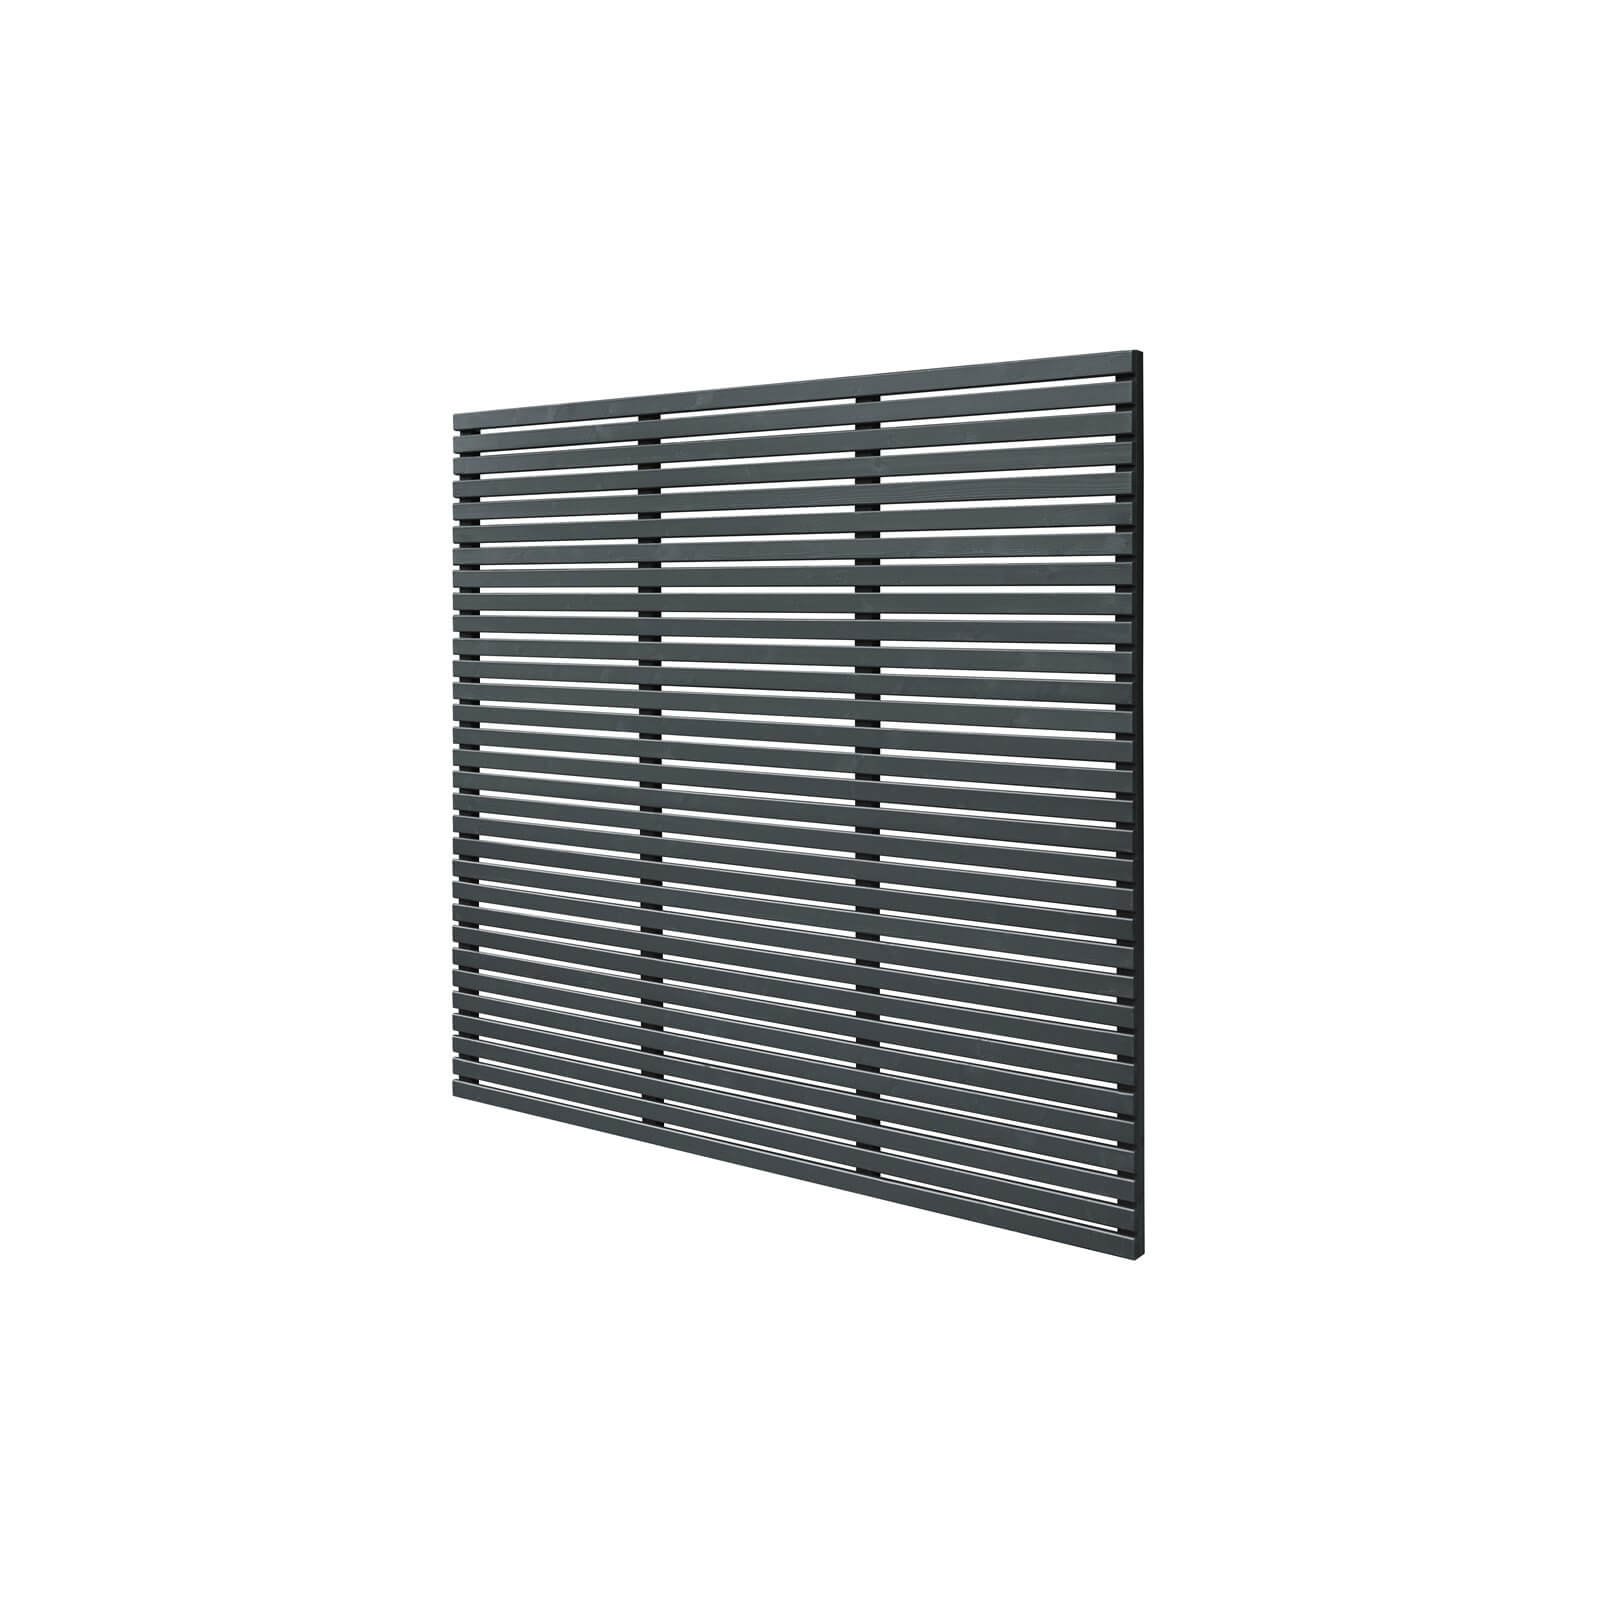 6ft x 6ft (1.8m x 1.8m) Grey Painted Contemporary Slatted Fence Panel - Pack of 3